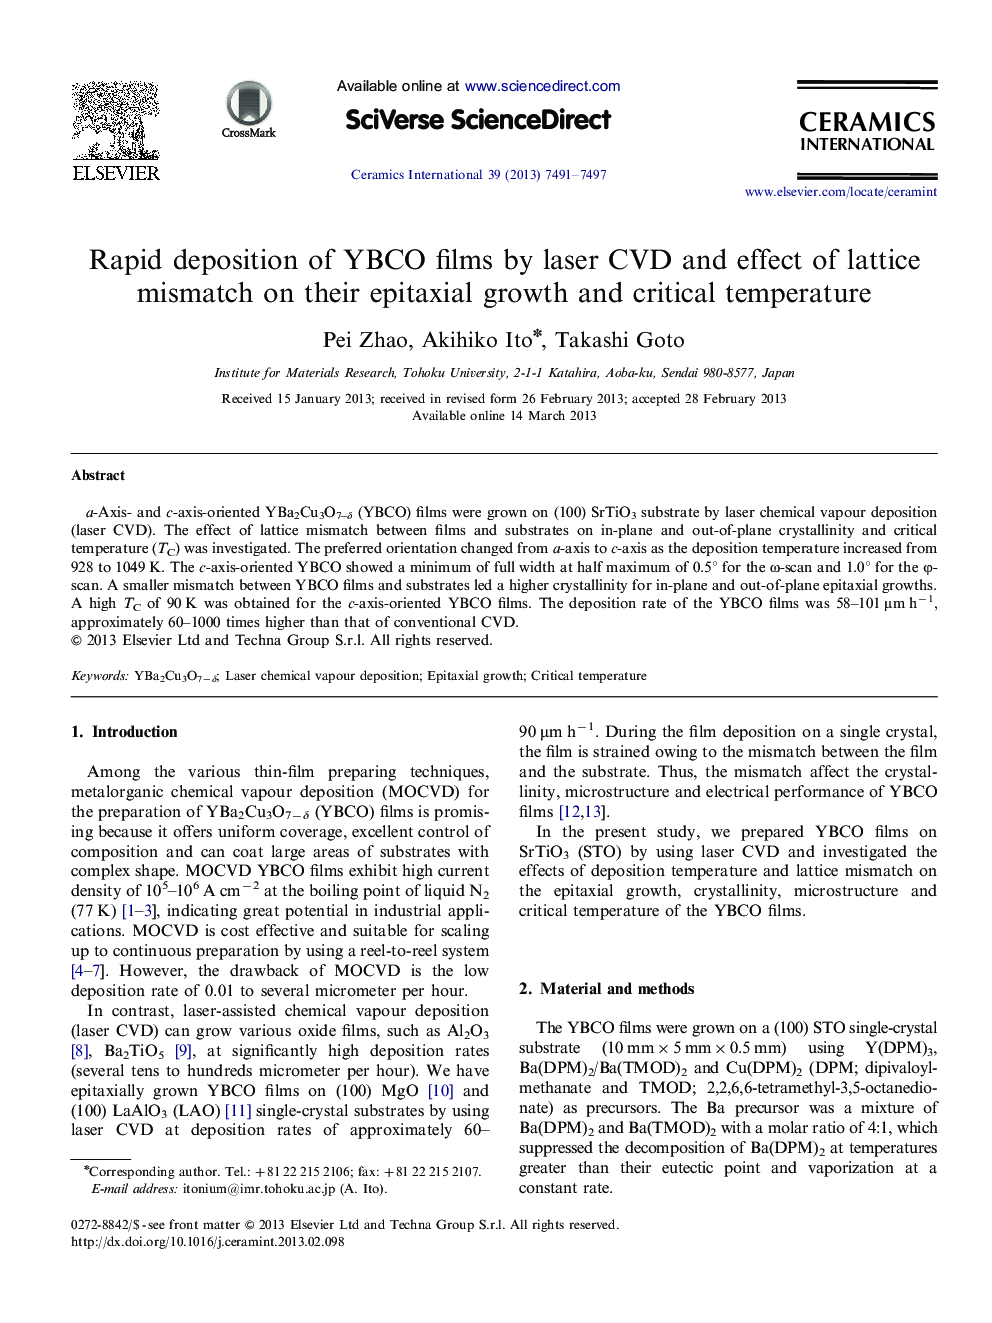 Rapid deposition of YBCO films by laser CVD and effect of lattice mismatch on their epitaxial growth and critical temperature